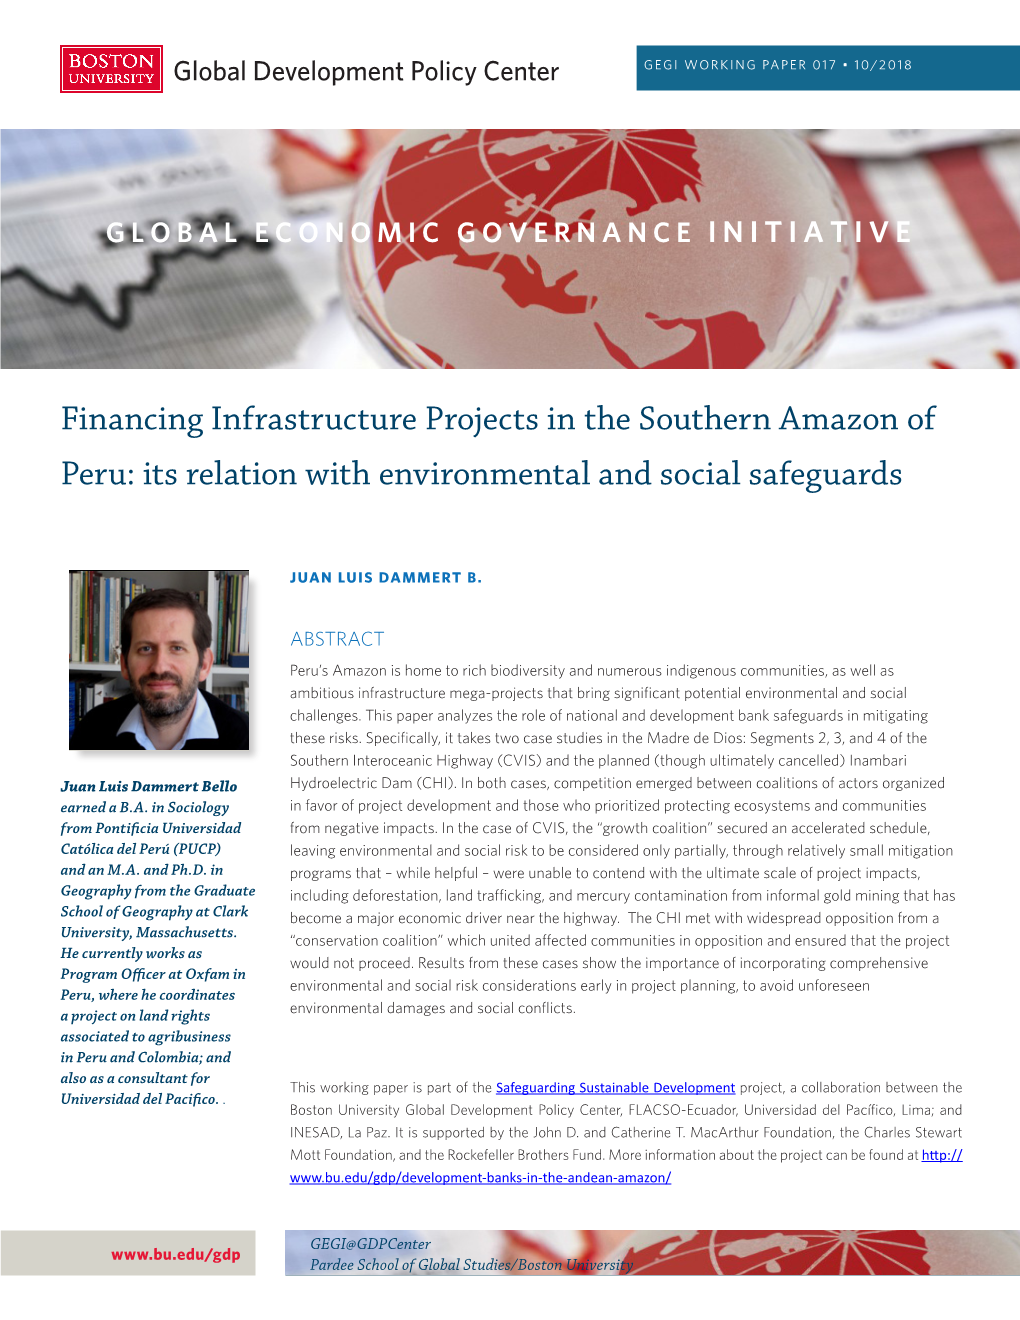 Financing Infrastructure Projects in the Southern Amazon of Peru: Its Relation with Environmental and Social Safeguards